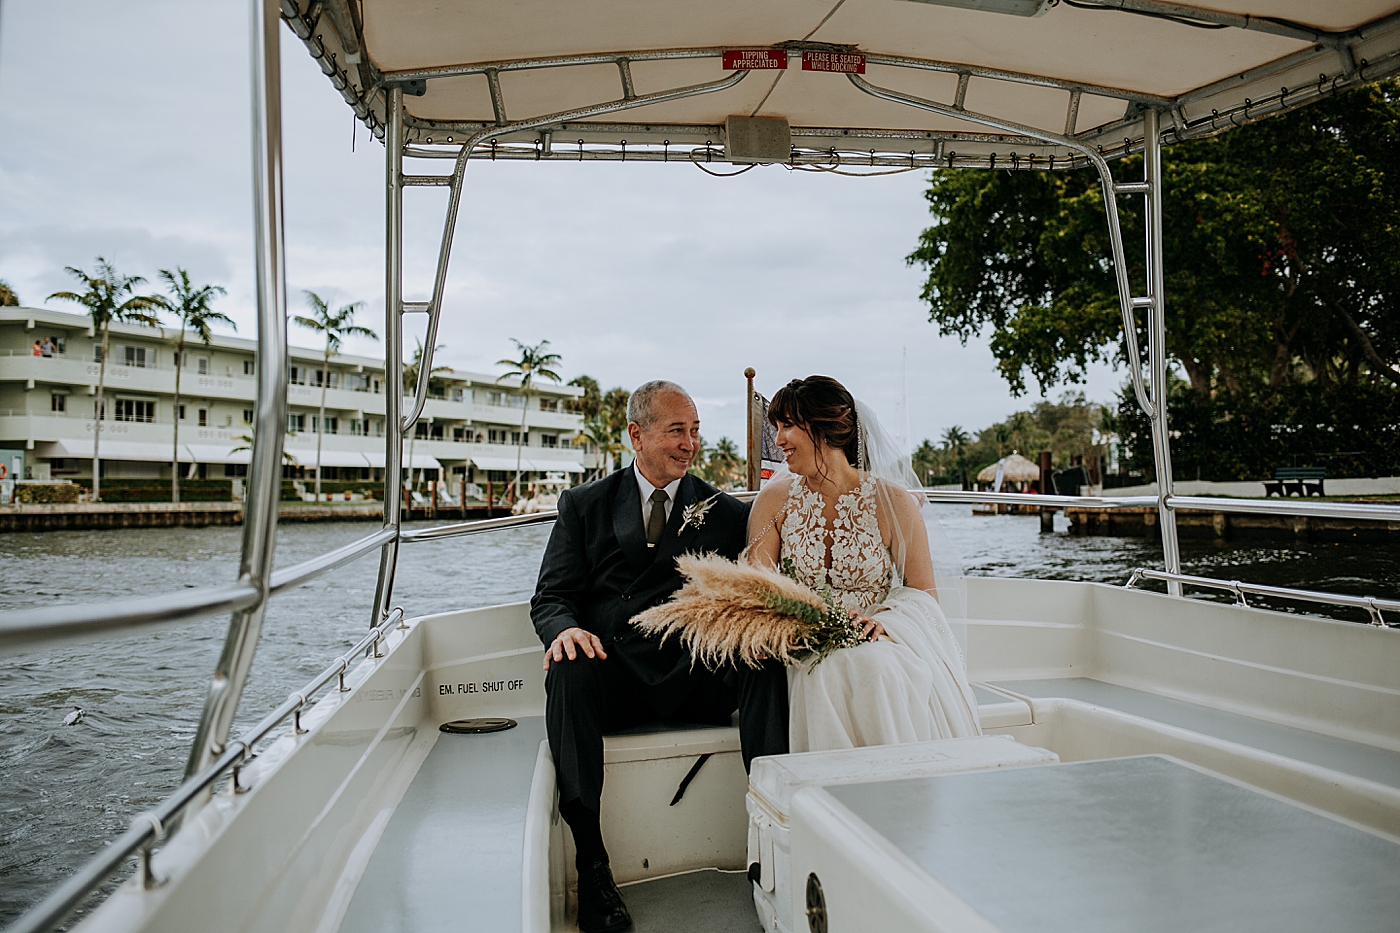 Father and Bride on the boat Historic Stranahan House Wedding Photography captured by South Florida Wedding Photographer Maggie Alvarez Photography